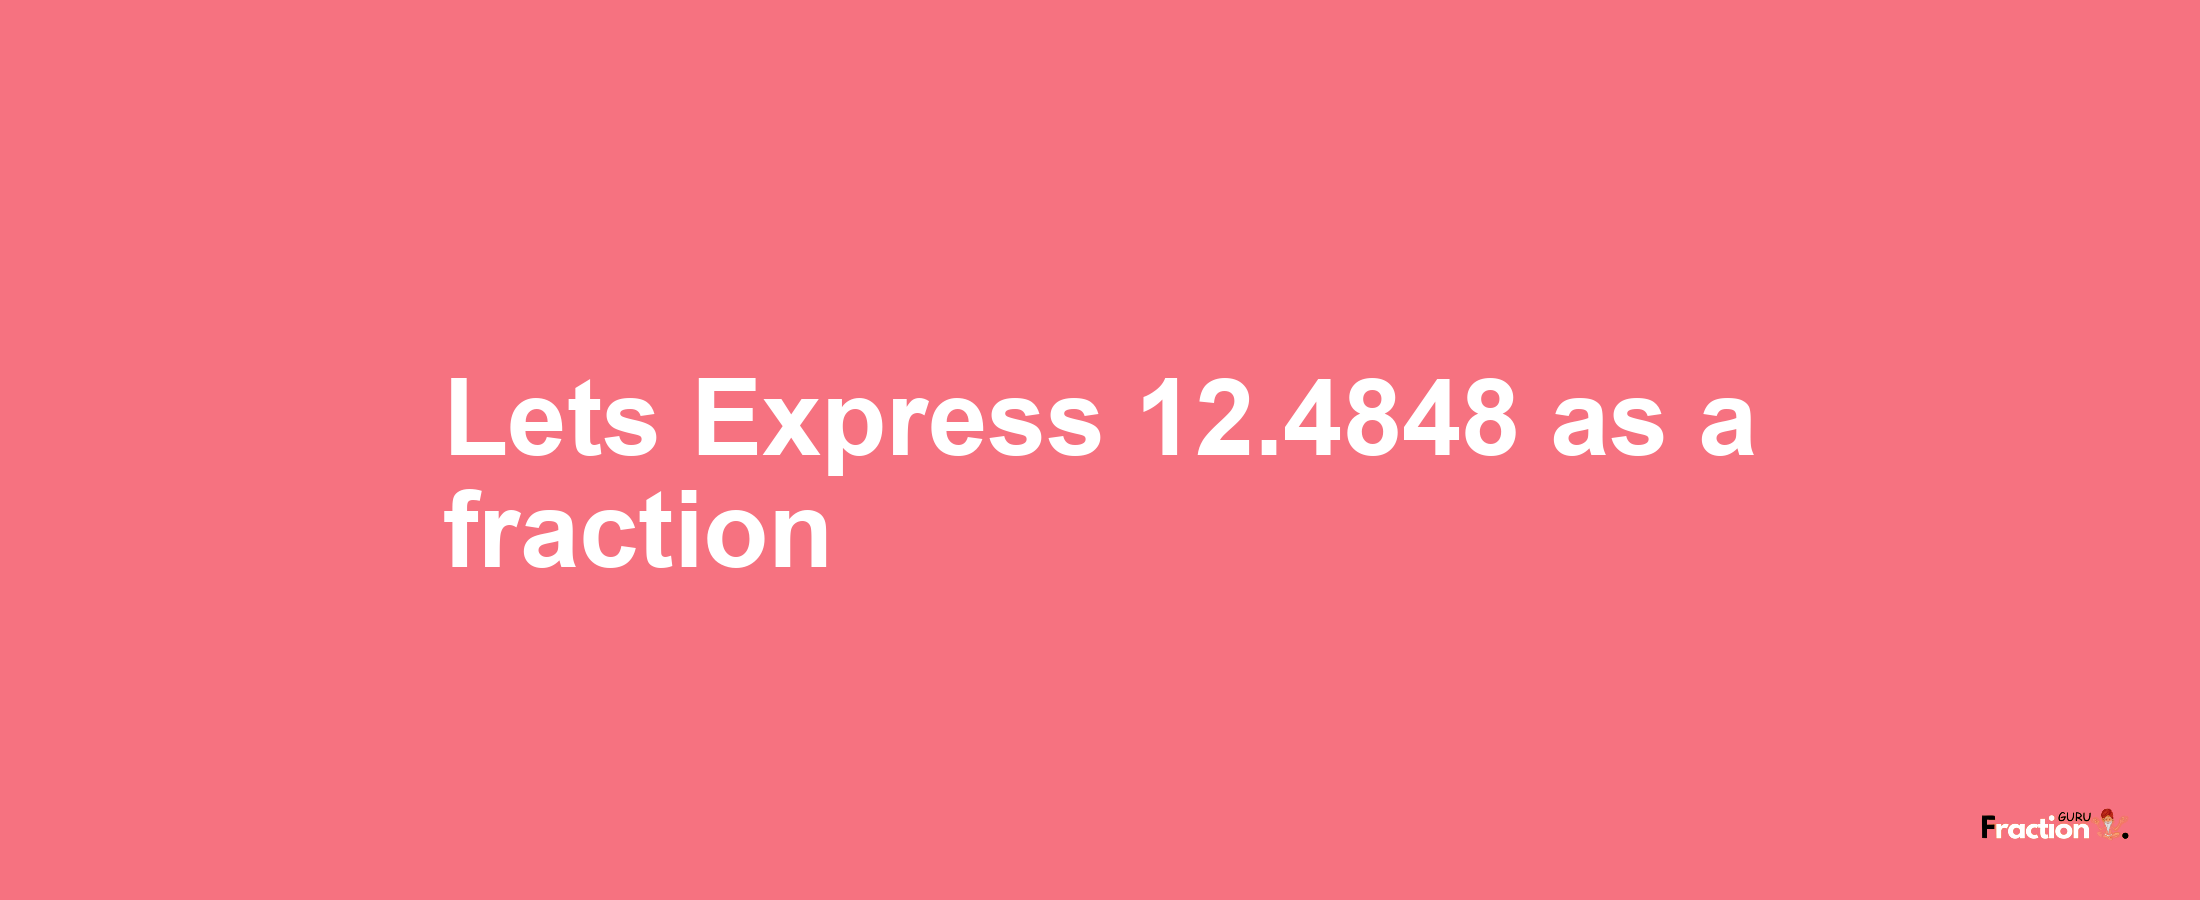 Lets Express 12.4848 as afraction